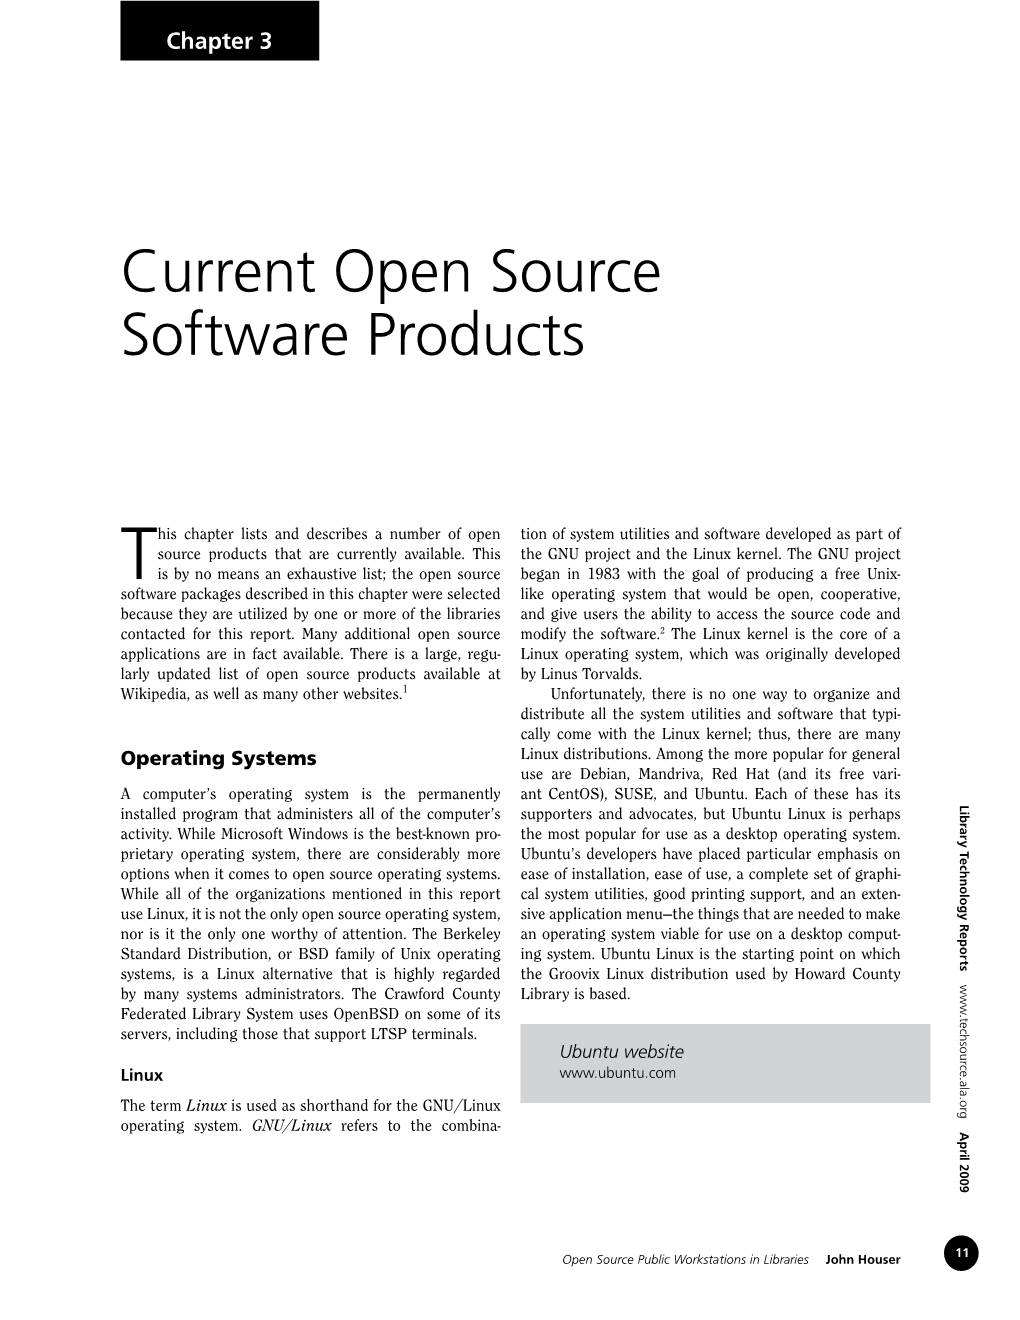 Current Open Source Software Products